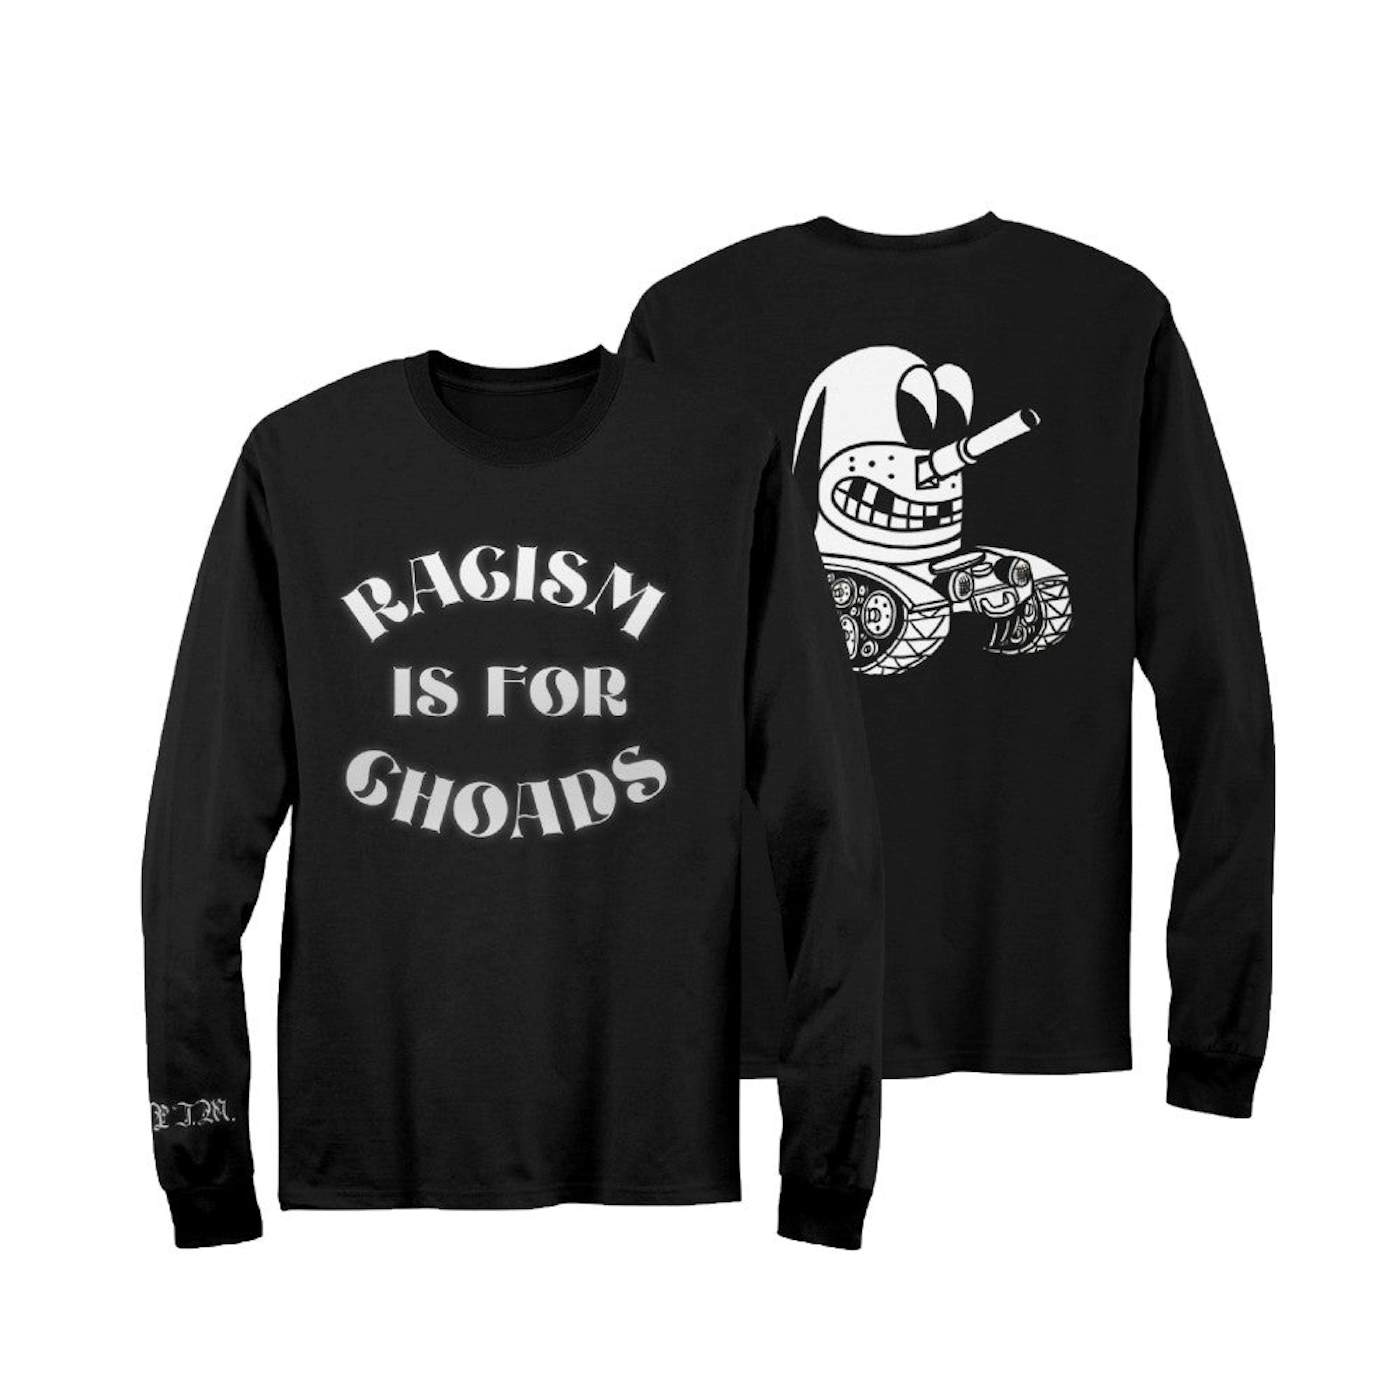 Portugal. The Man Racism Is For Choads Longsleeve